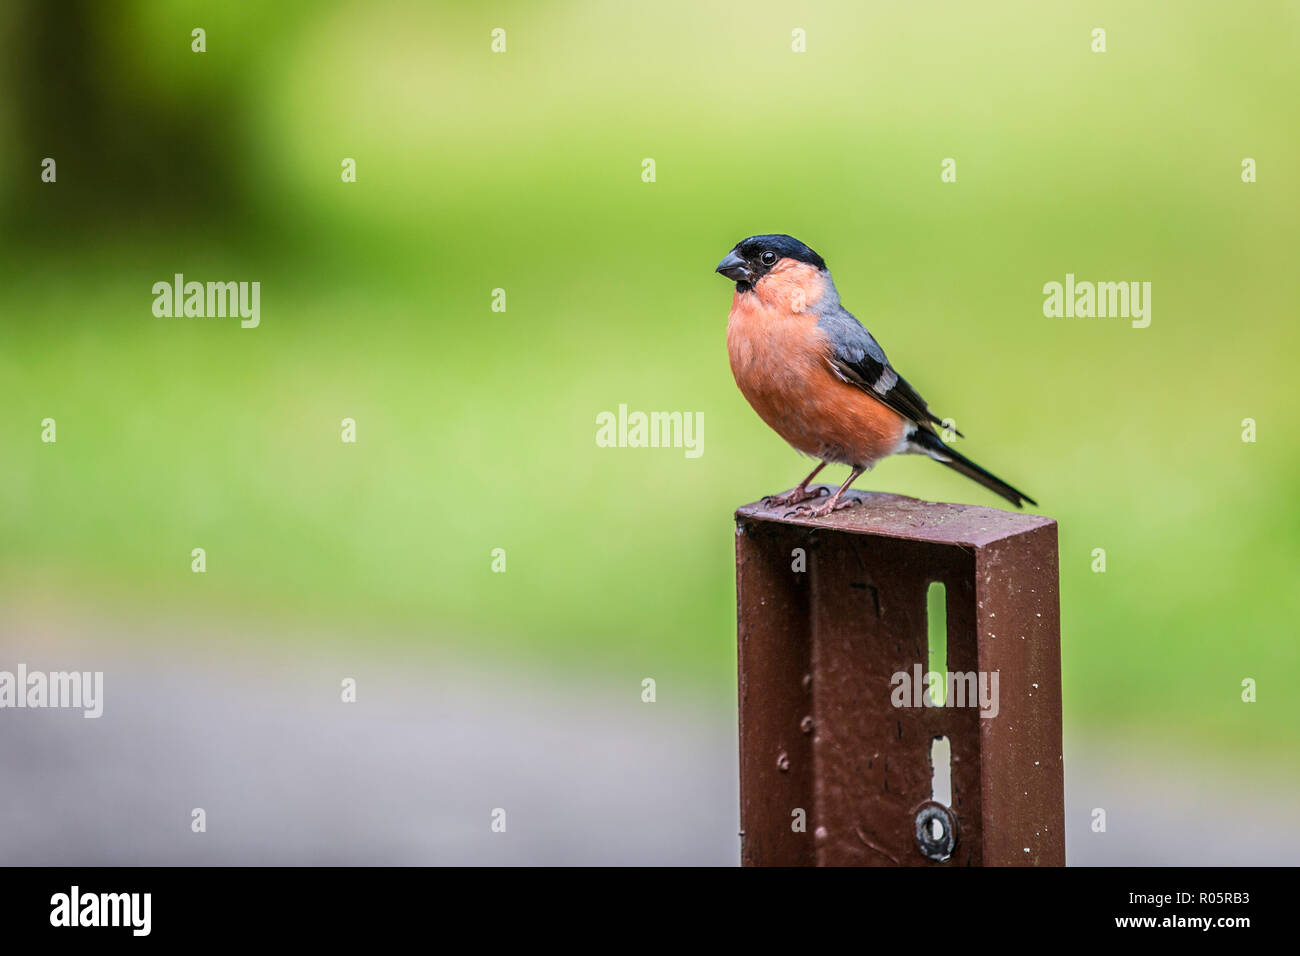 beautiful image of a eurasian bullfinch bird standing on a metal pole with a green background, space for text or copy space Stock Photo